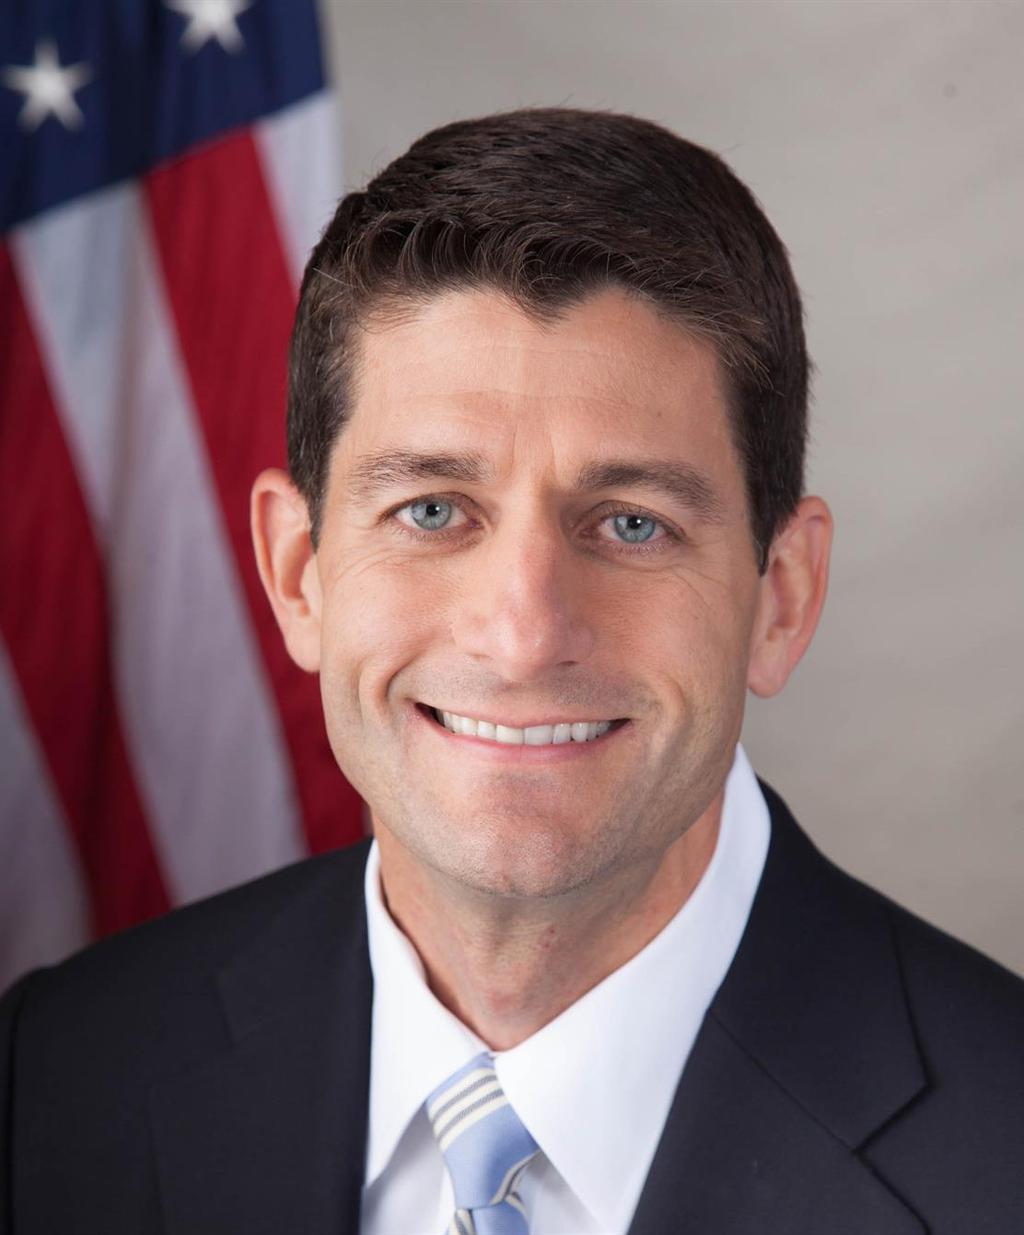 The elected head of the U.S. House of Representatives is Rep. Paul Ryan (R- Wisconsin) The Speaker is also an elected Congressional Representative from his home district, in his home state.